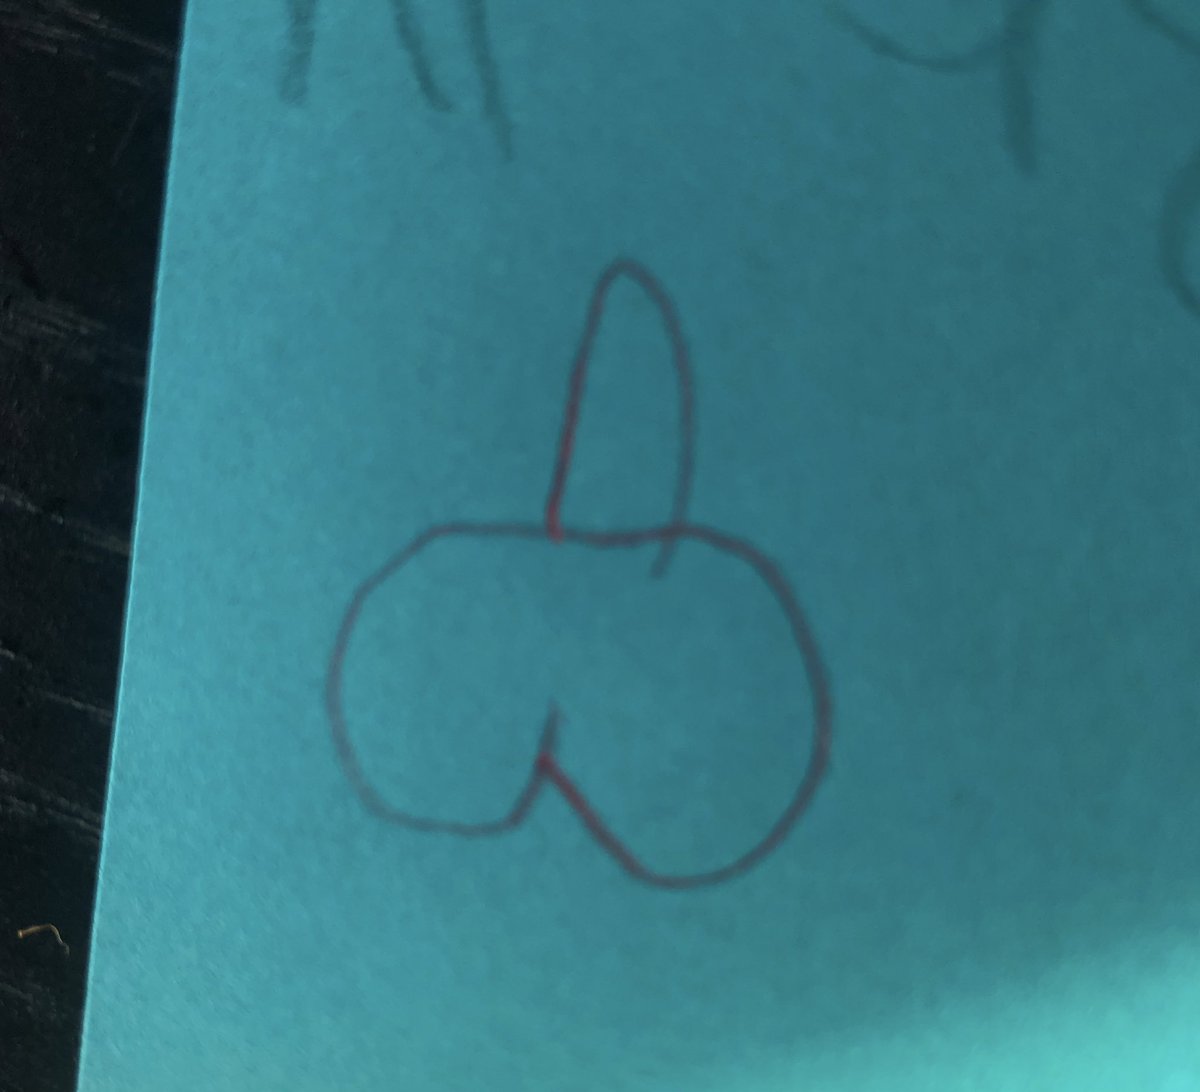 My kid is drawing hearts on a card he’s making....

I think I need to intervene 😂😂😂

#medtwitterkids #parenting